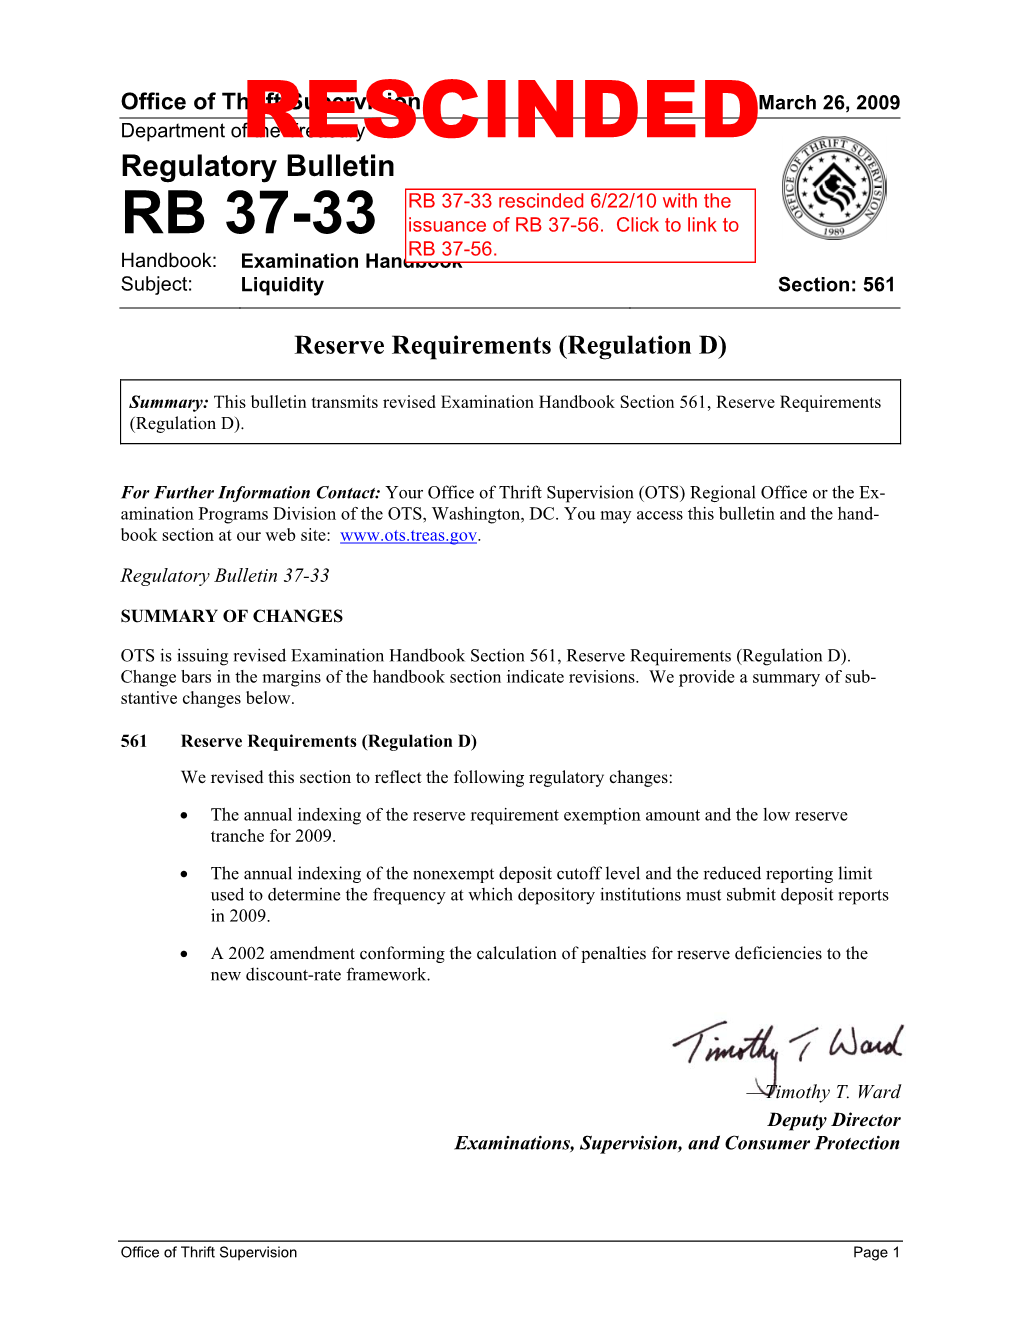 RB 37-33, Reserve Requirements (Regulation D), March 2009